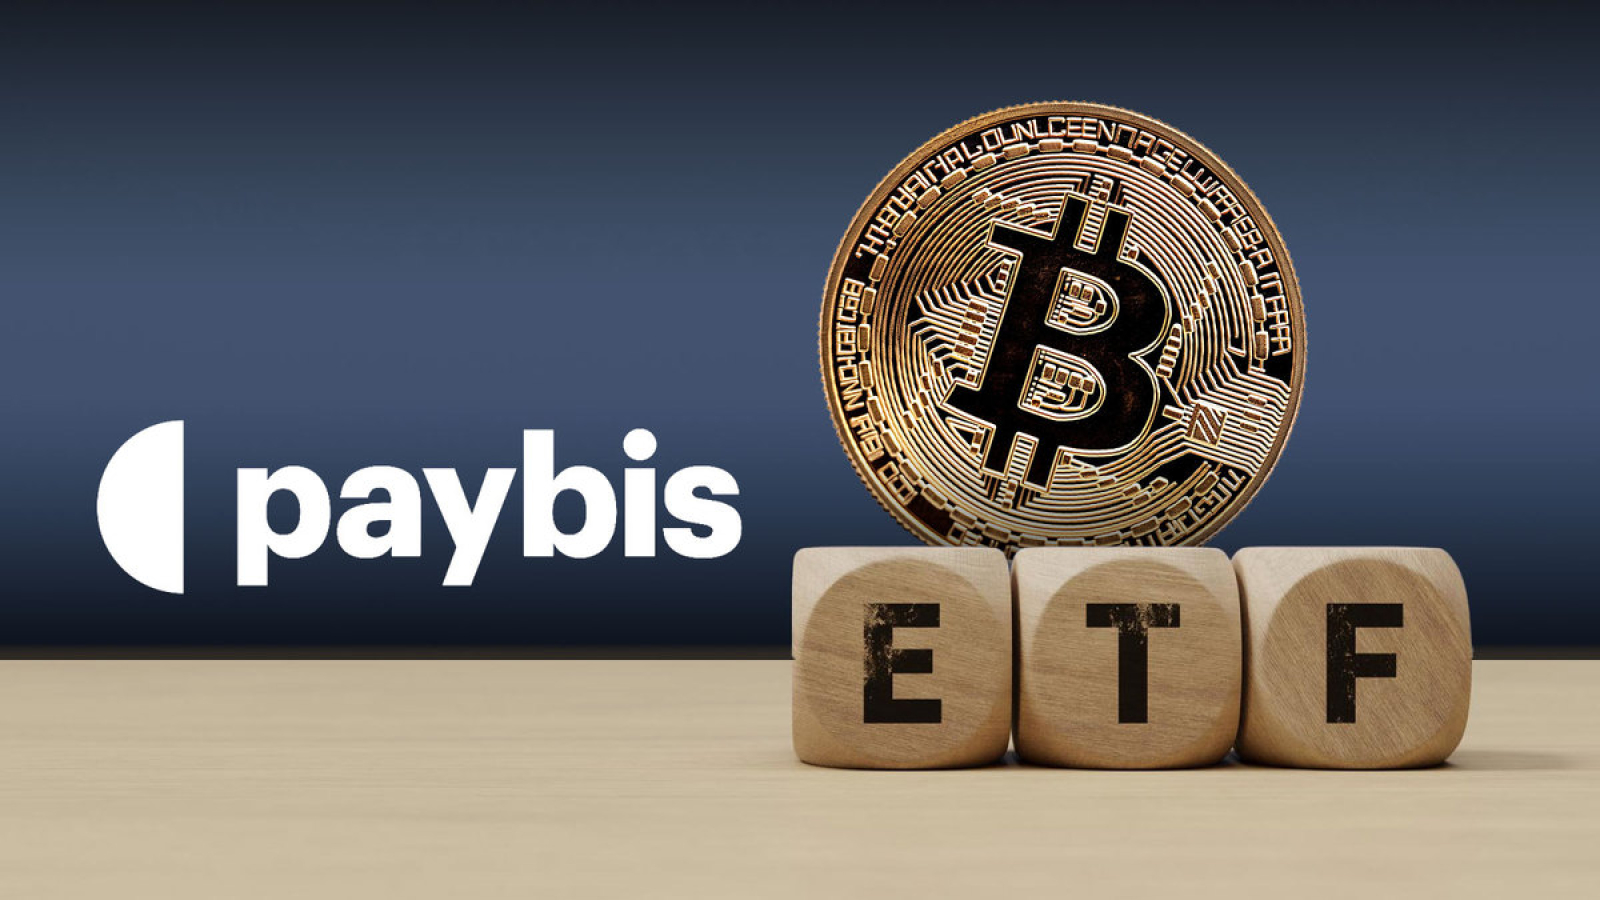 As Bitcoin ETF Is Approved, Paybis Allows Seamless BTC Purchasing With Card